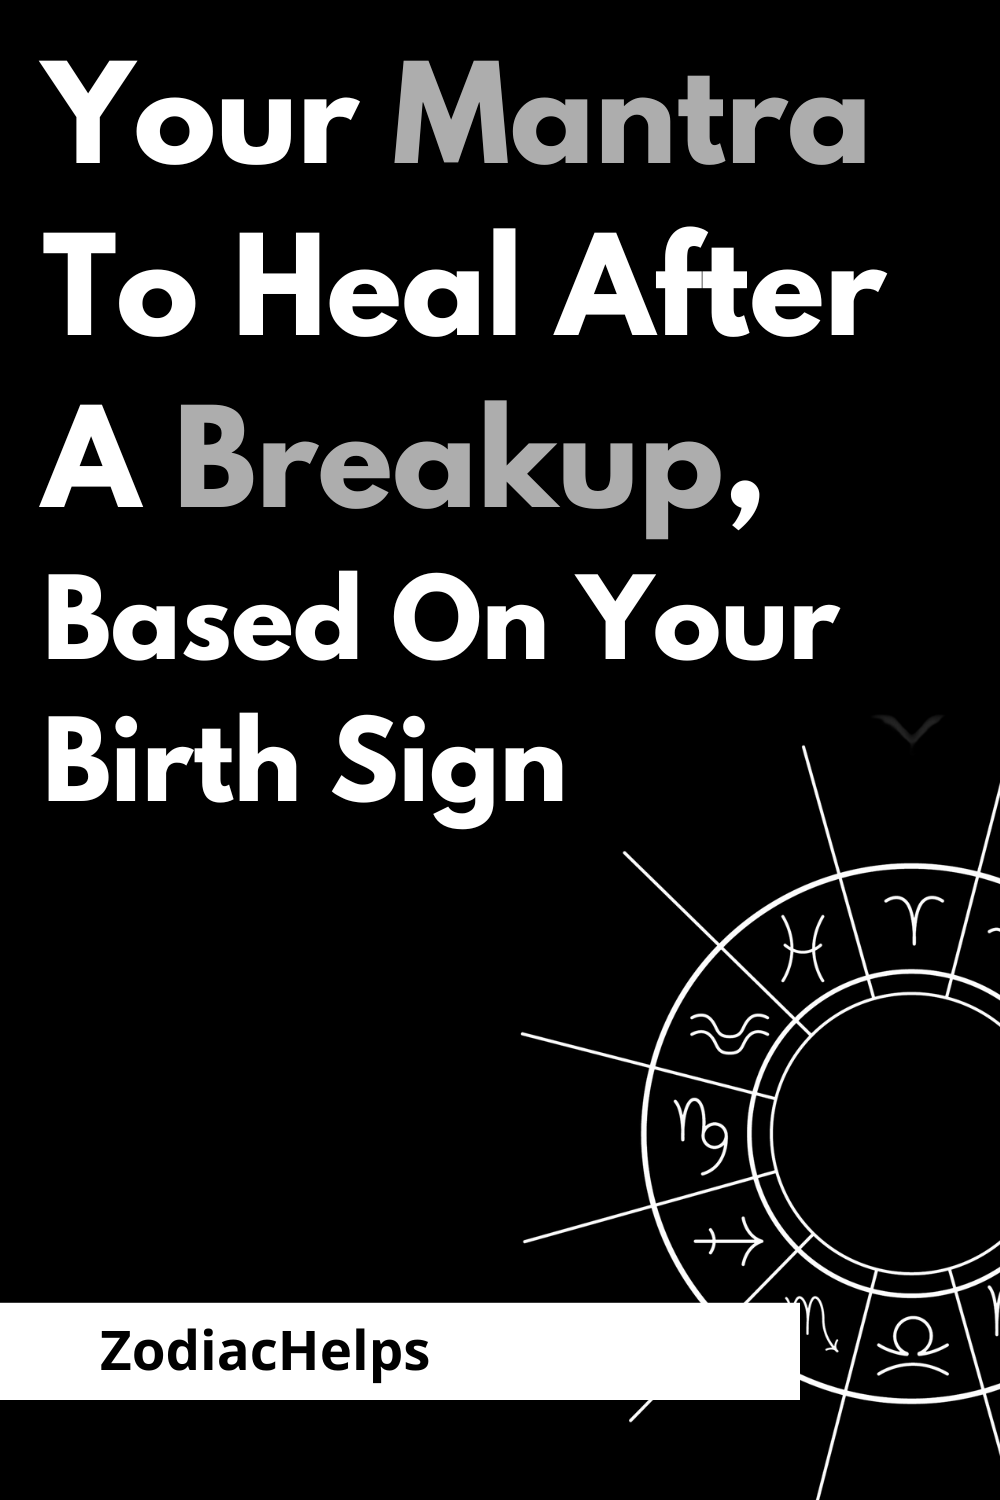 Your Mantra To Heal After A Breakup, Based On Your Birth Sign